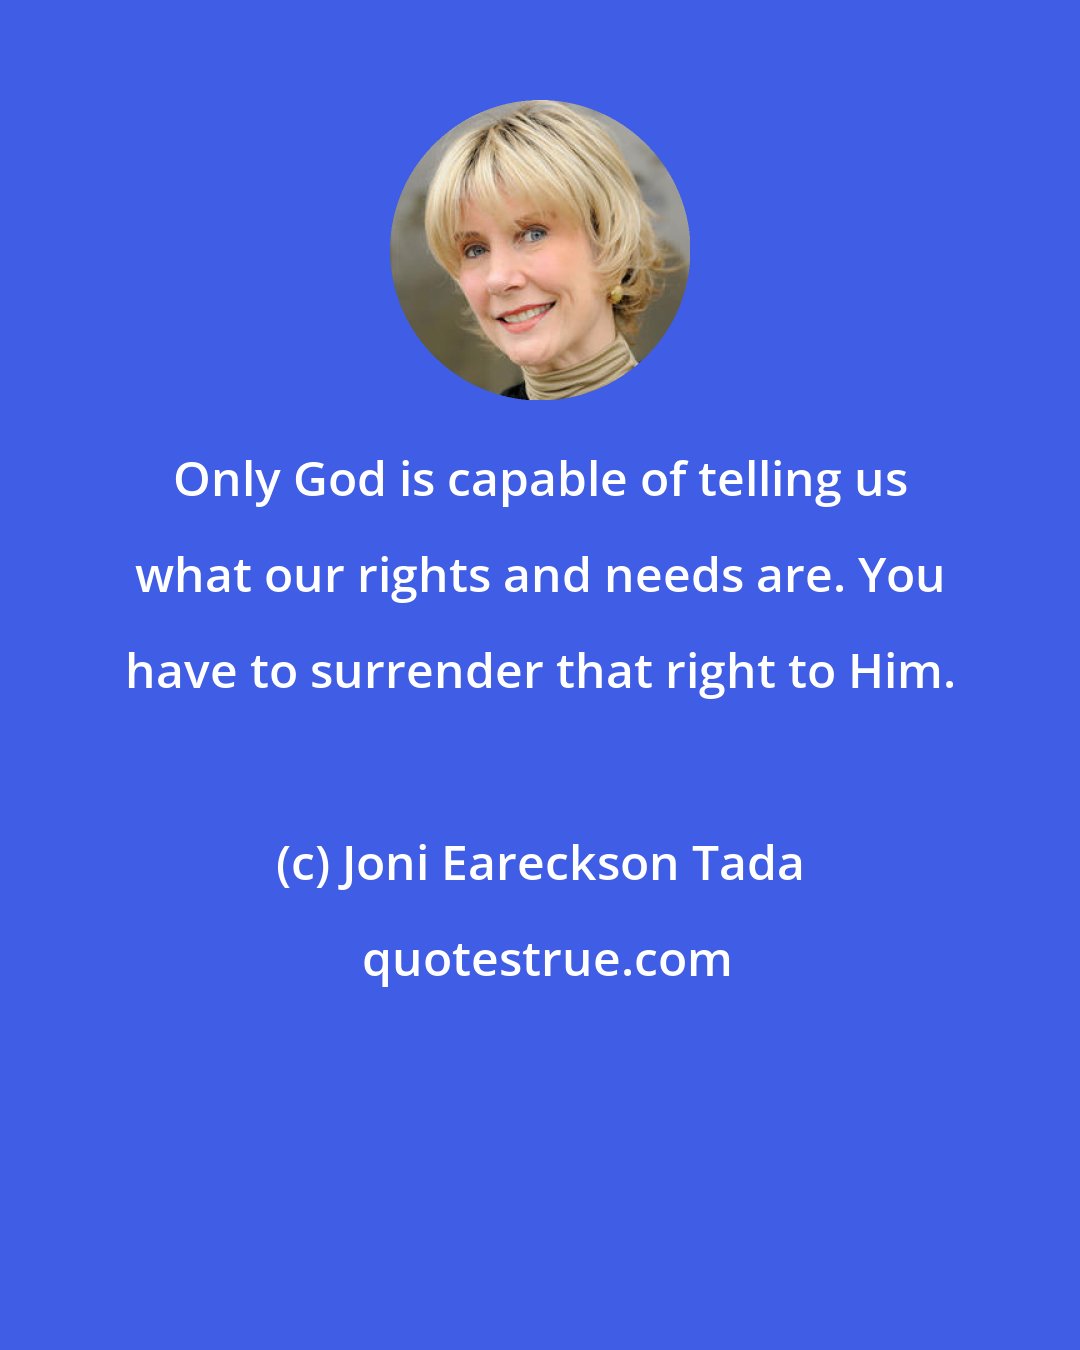 Joni Eareckson Tada: Only God is capable of telling us what our rights and needs are. You have to surrender that right to Him.